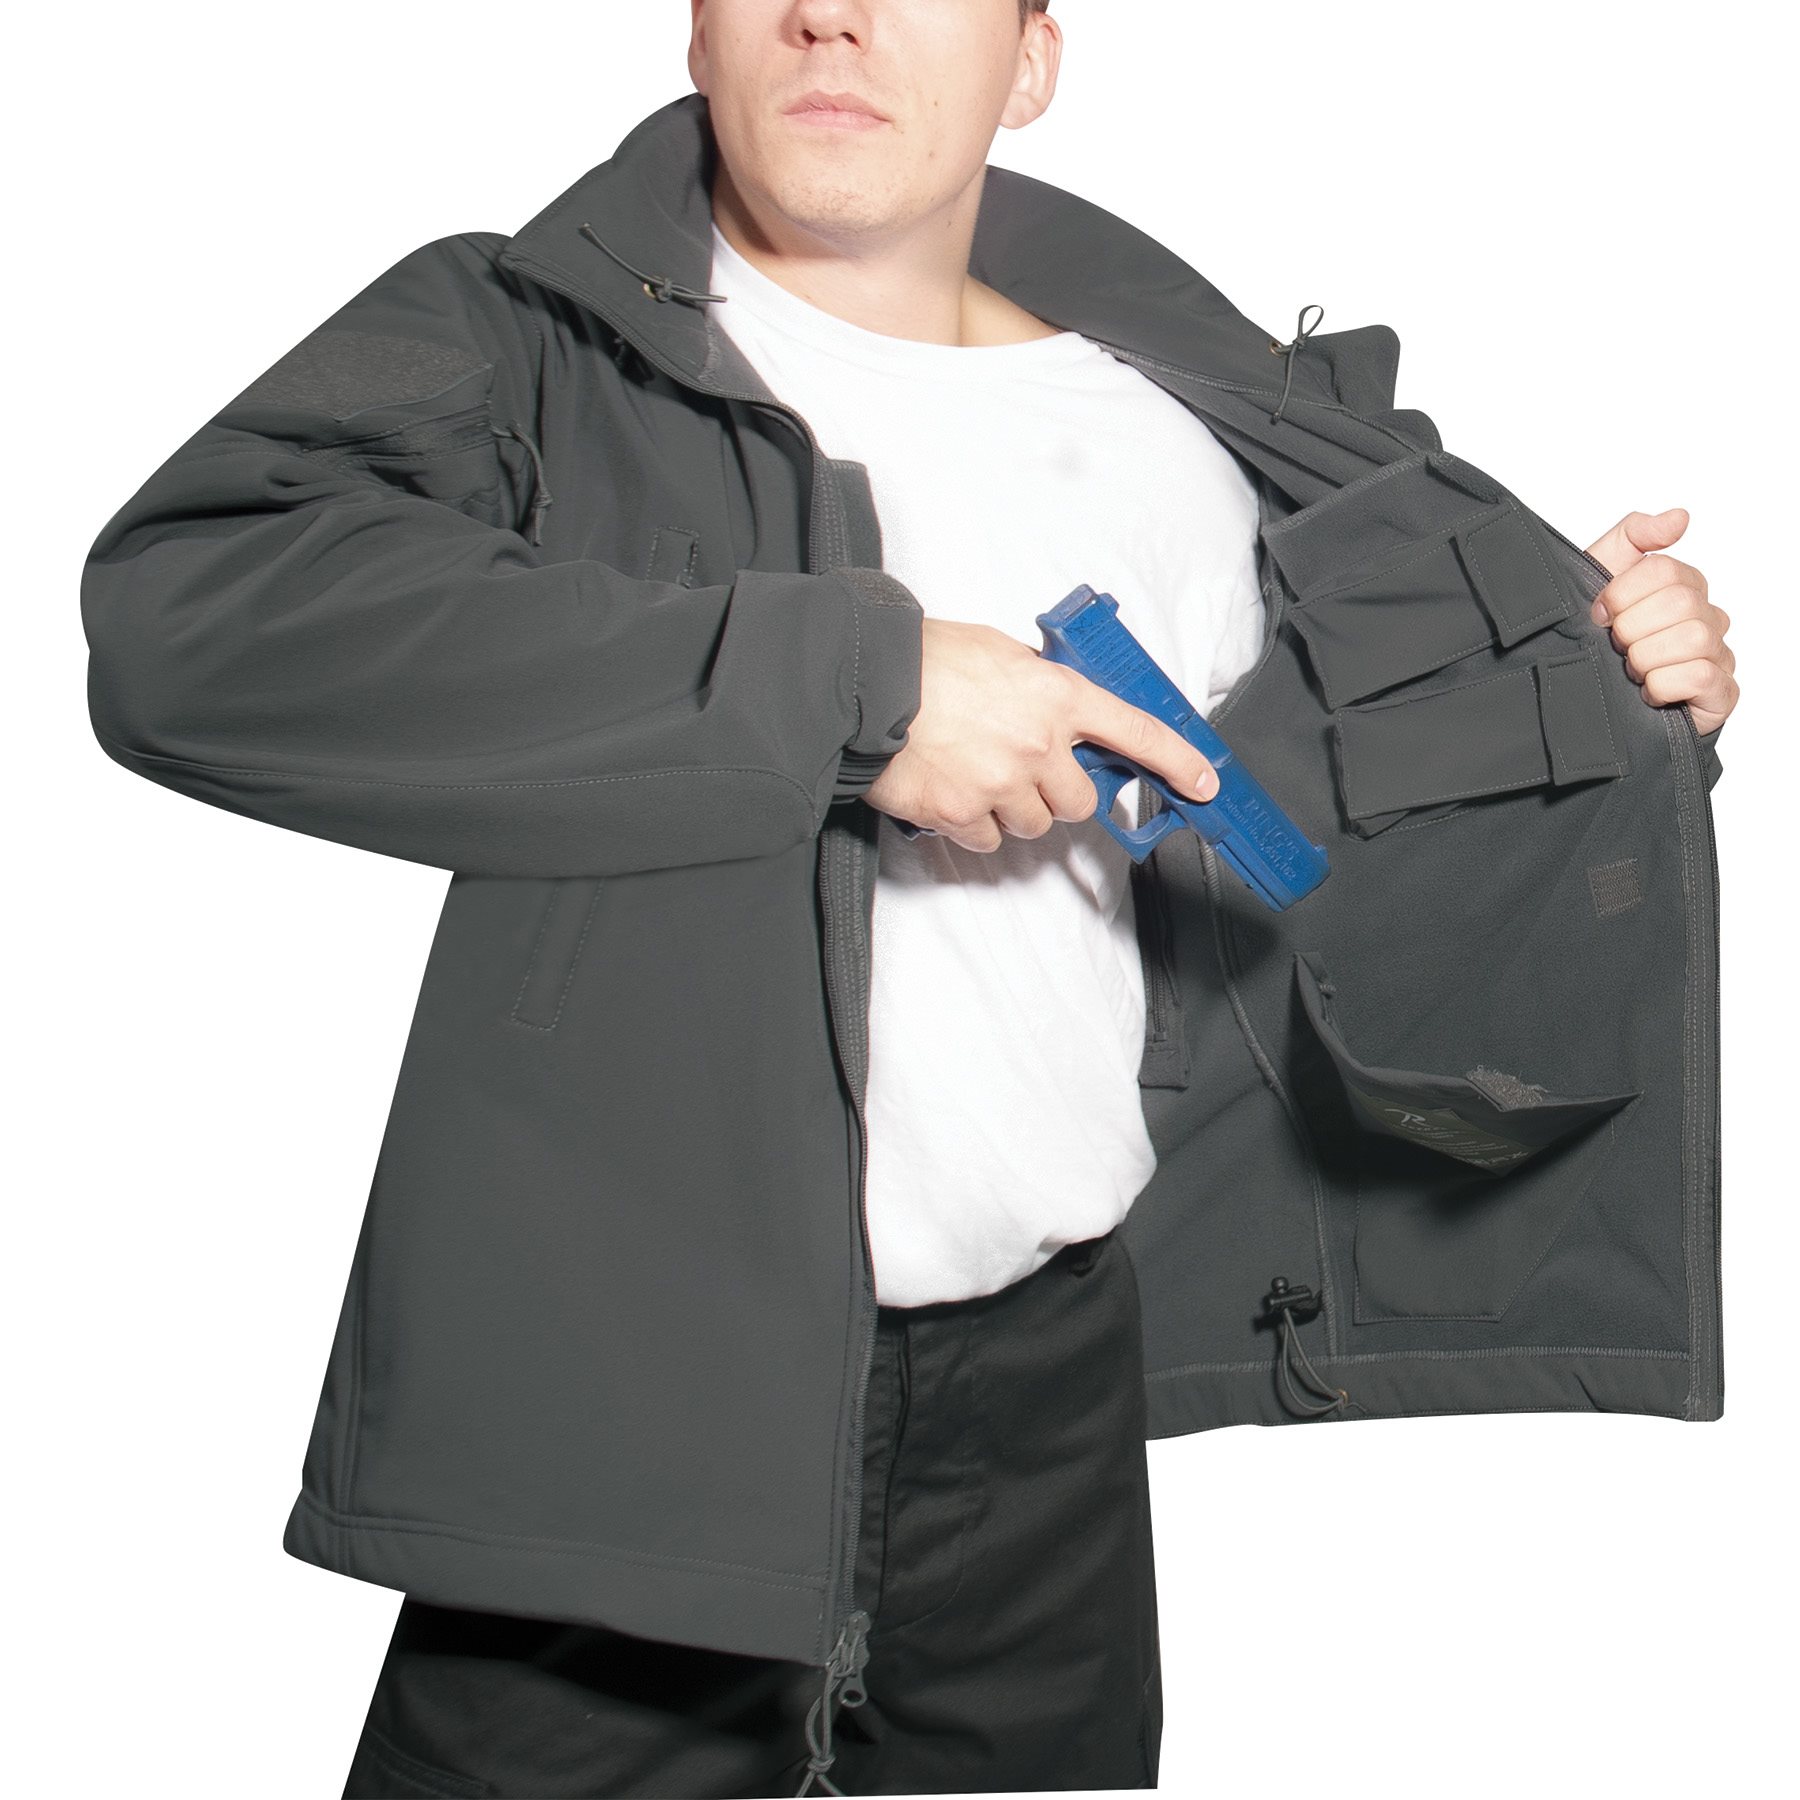 Concealed Carry Soft Shell Jacket GUNMETAL GREY ROTHCO 55785 L-11